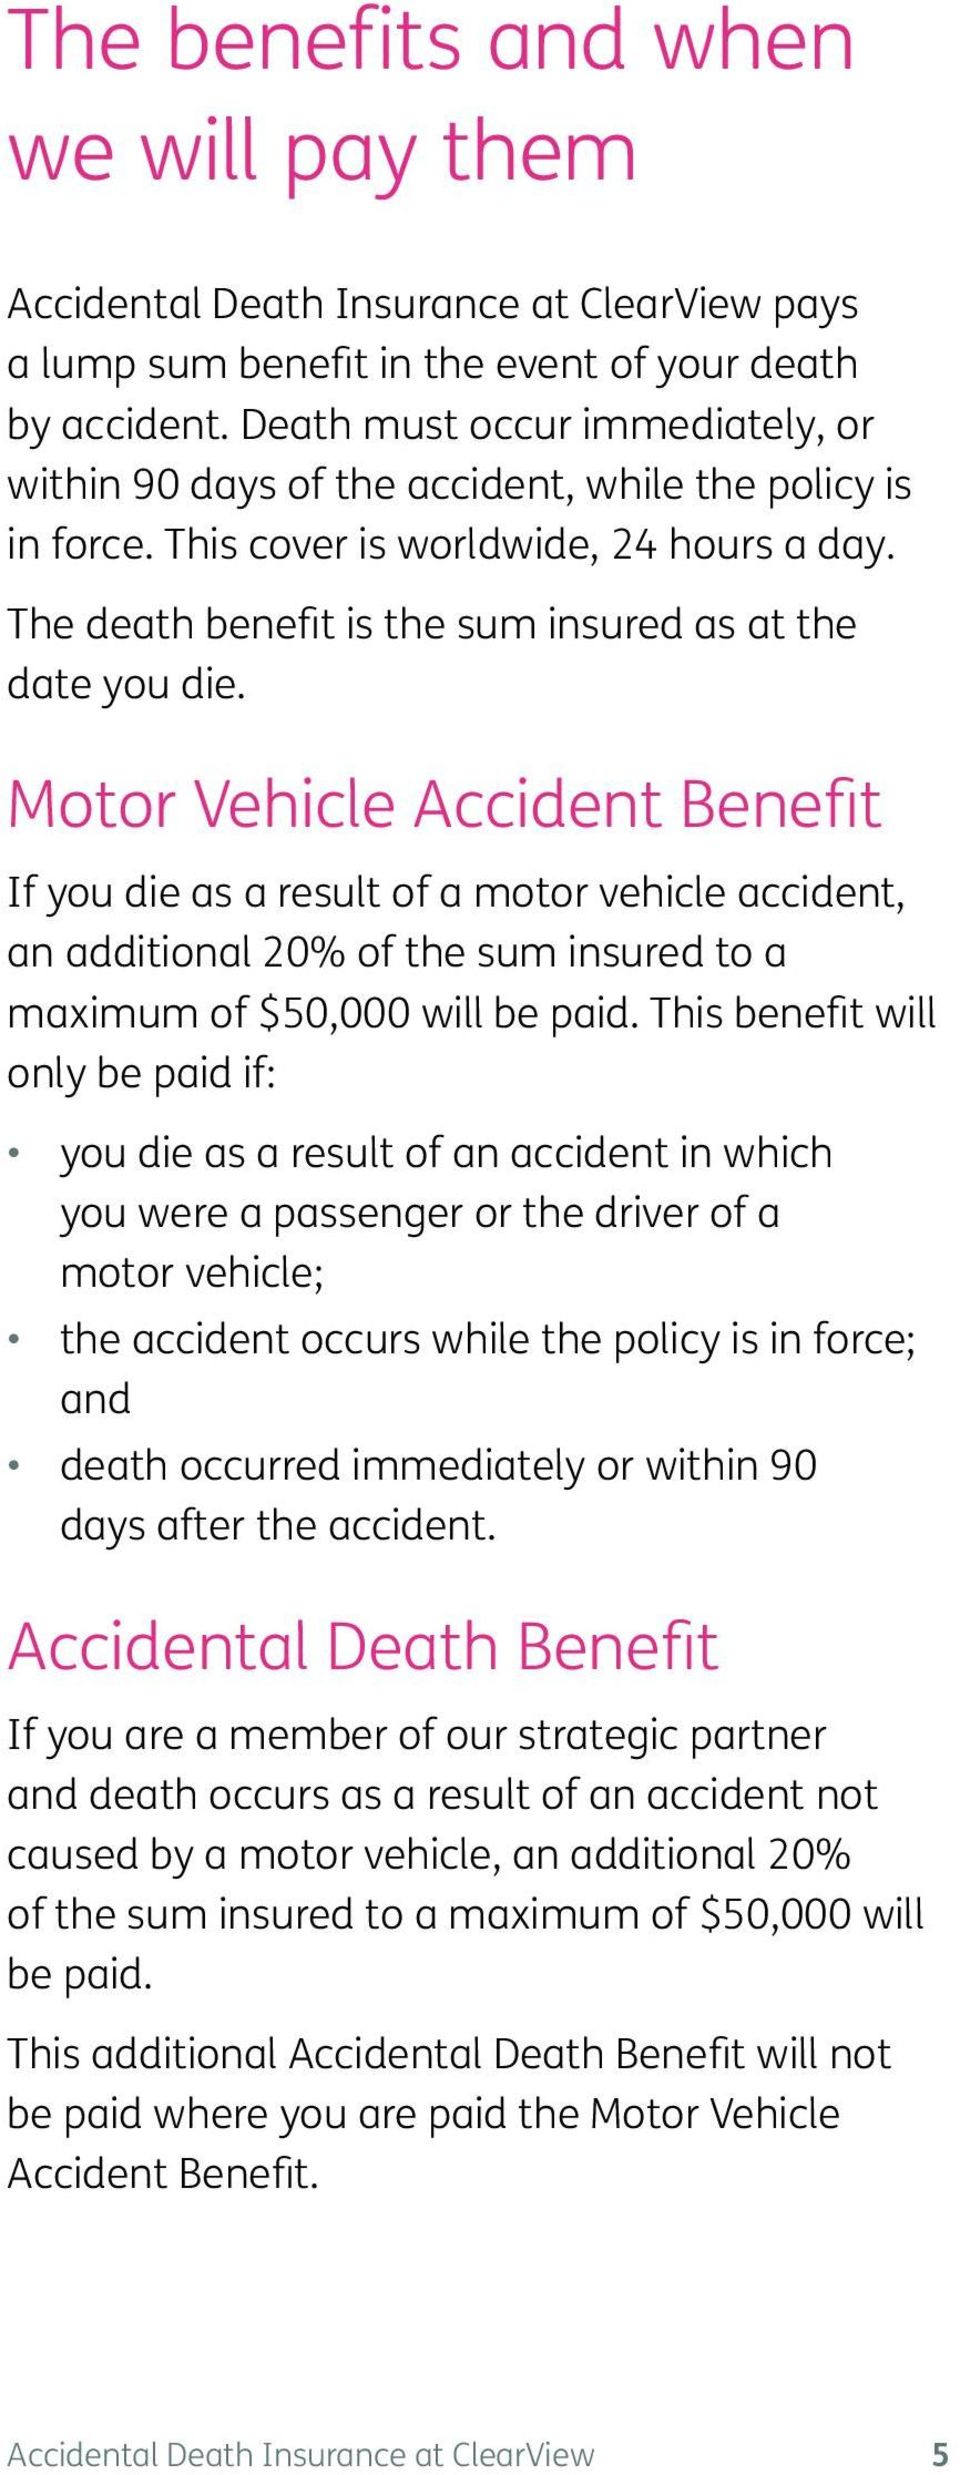 Motor Vehicle Accident Benefit If you die as a result of a motor vehicle accident, an additional 20% of the sum insured to a maximum of $50,000 will be paid.